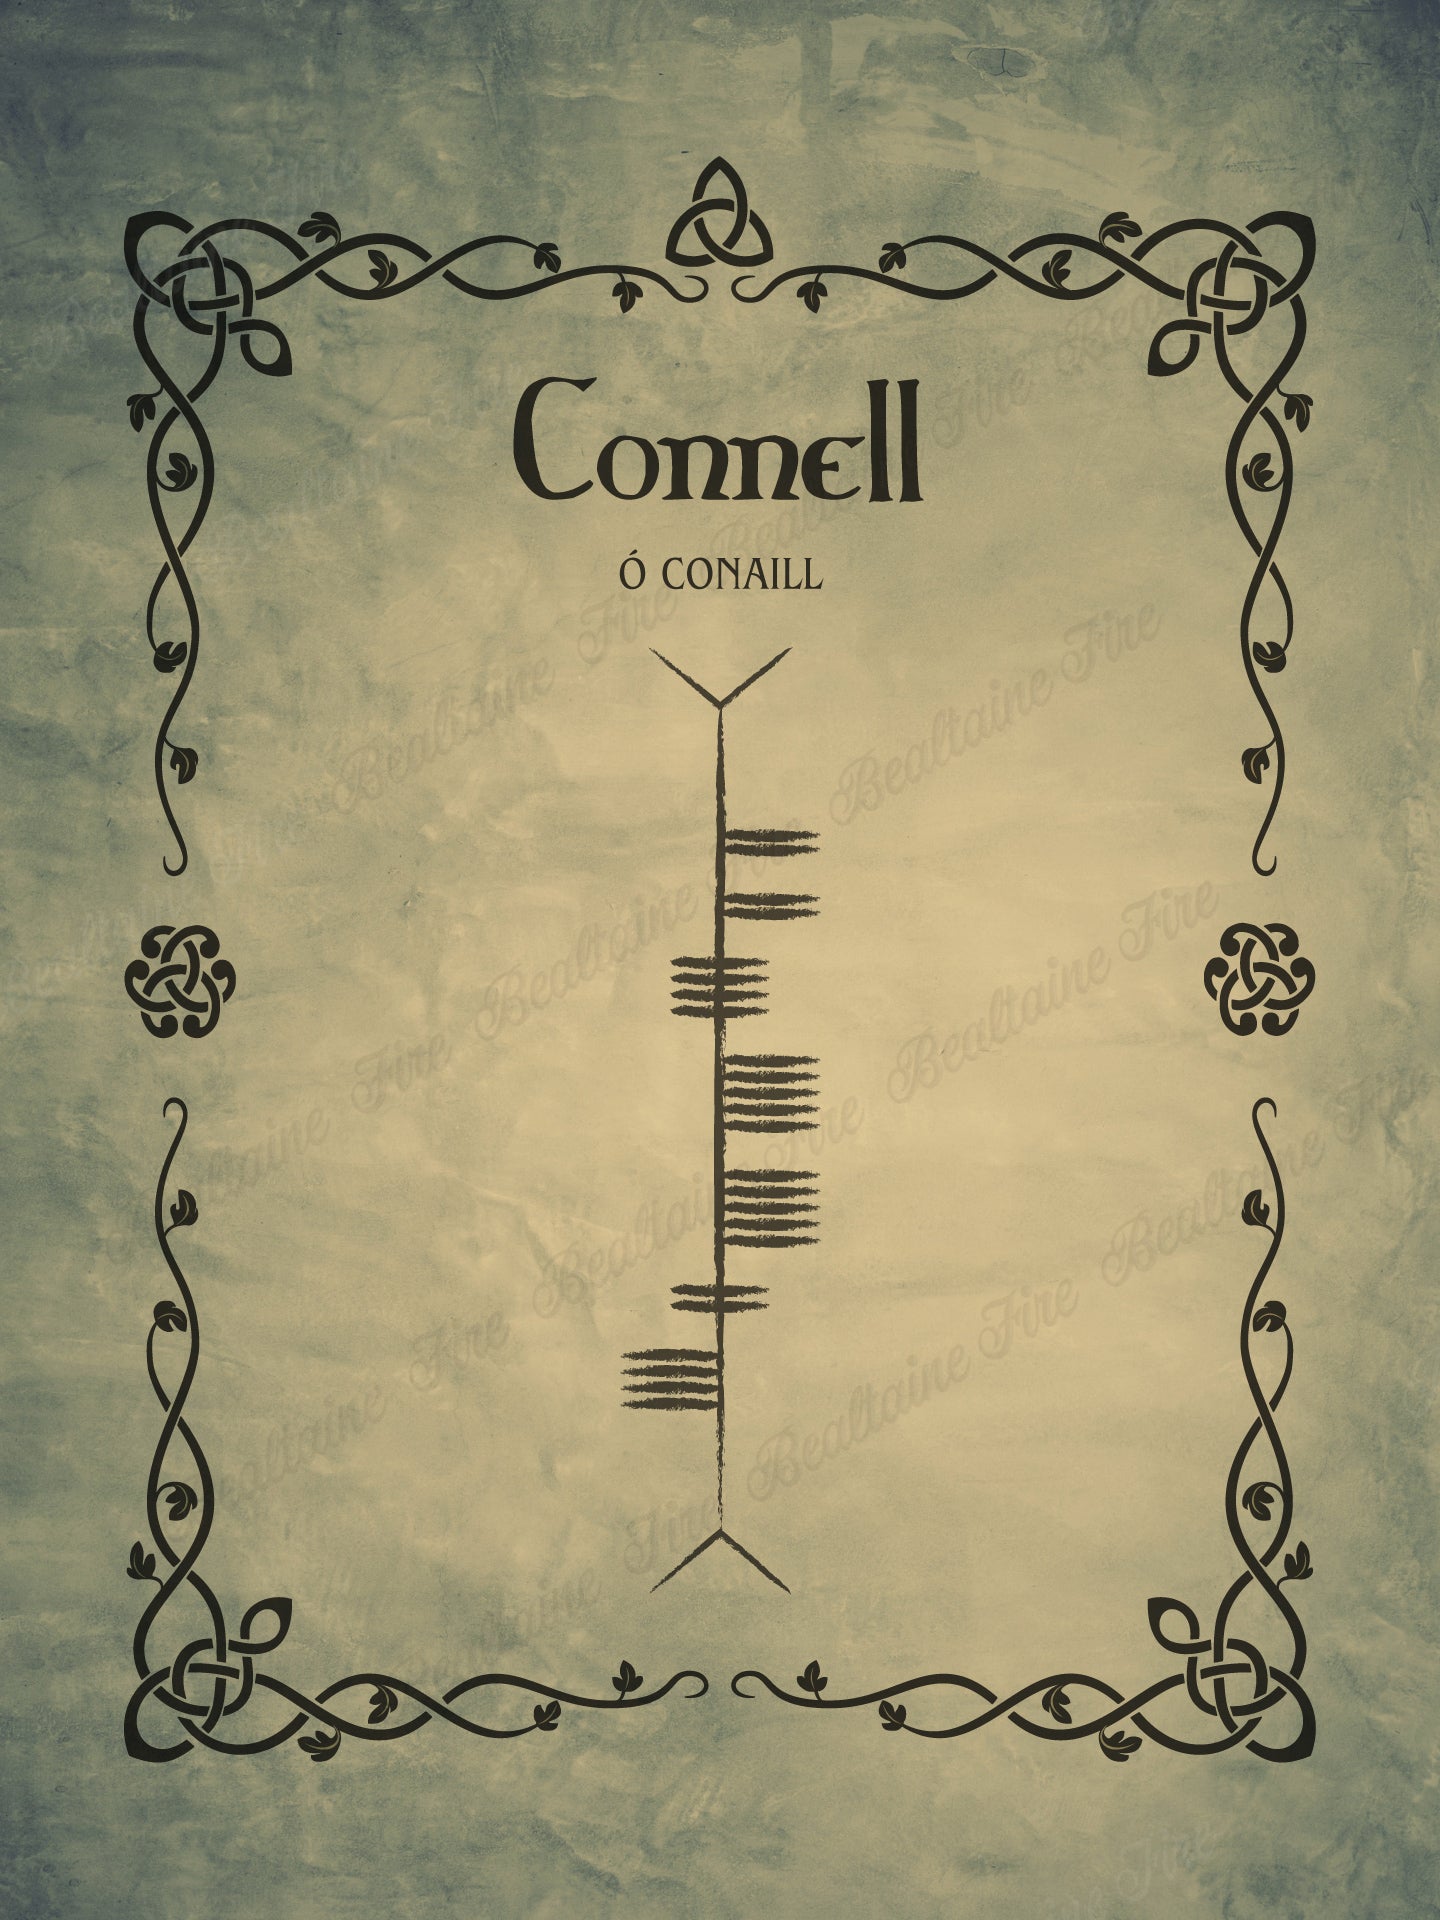 Connell in Ogham premium luster unframed print